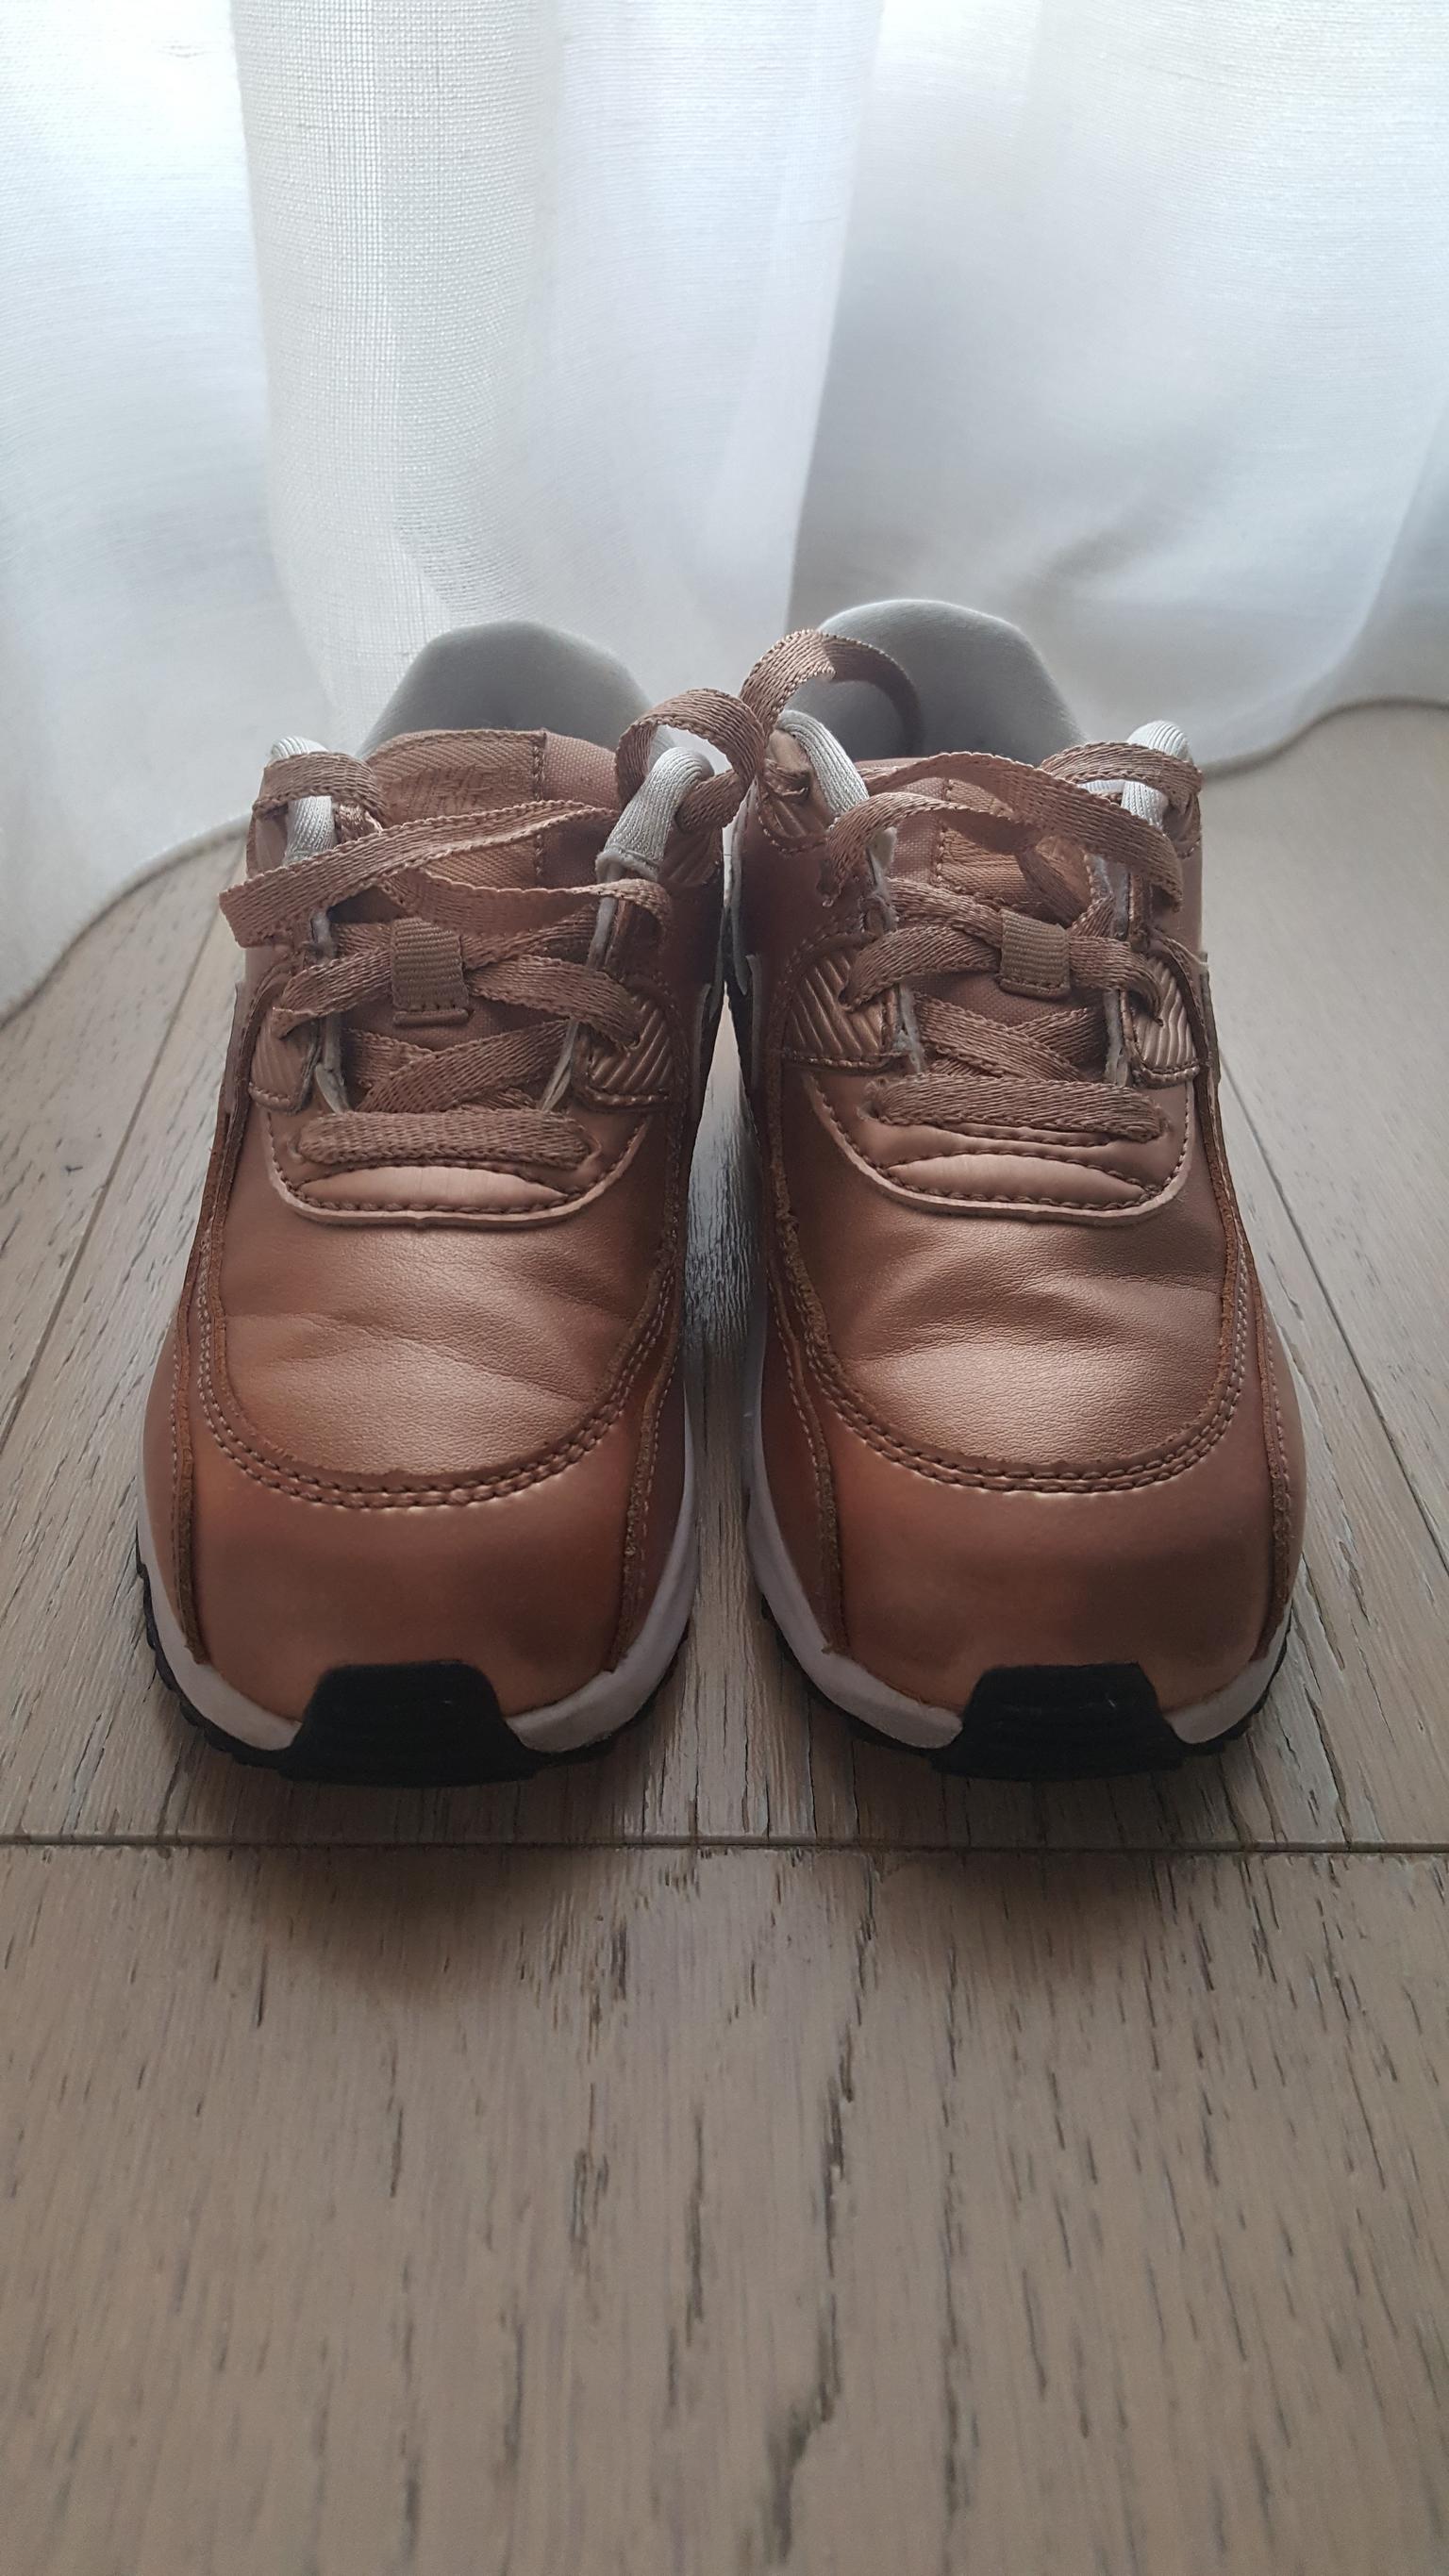 Nike Air Max bambina n. 27 in 20020 Cesate for €20.00 for sale | Shpock